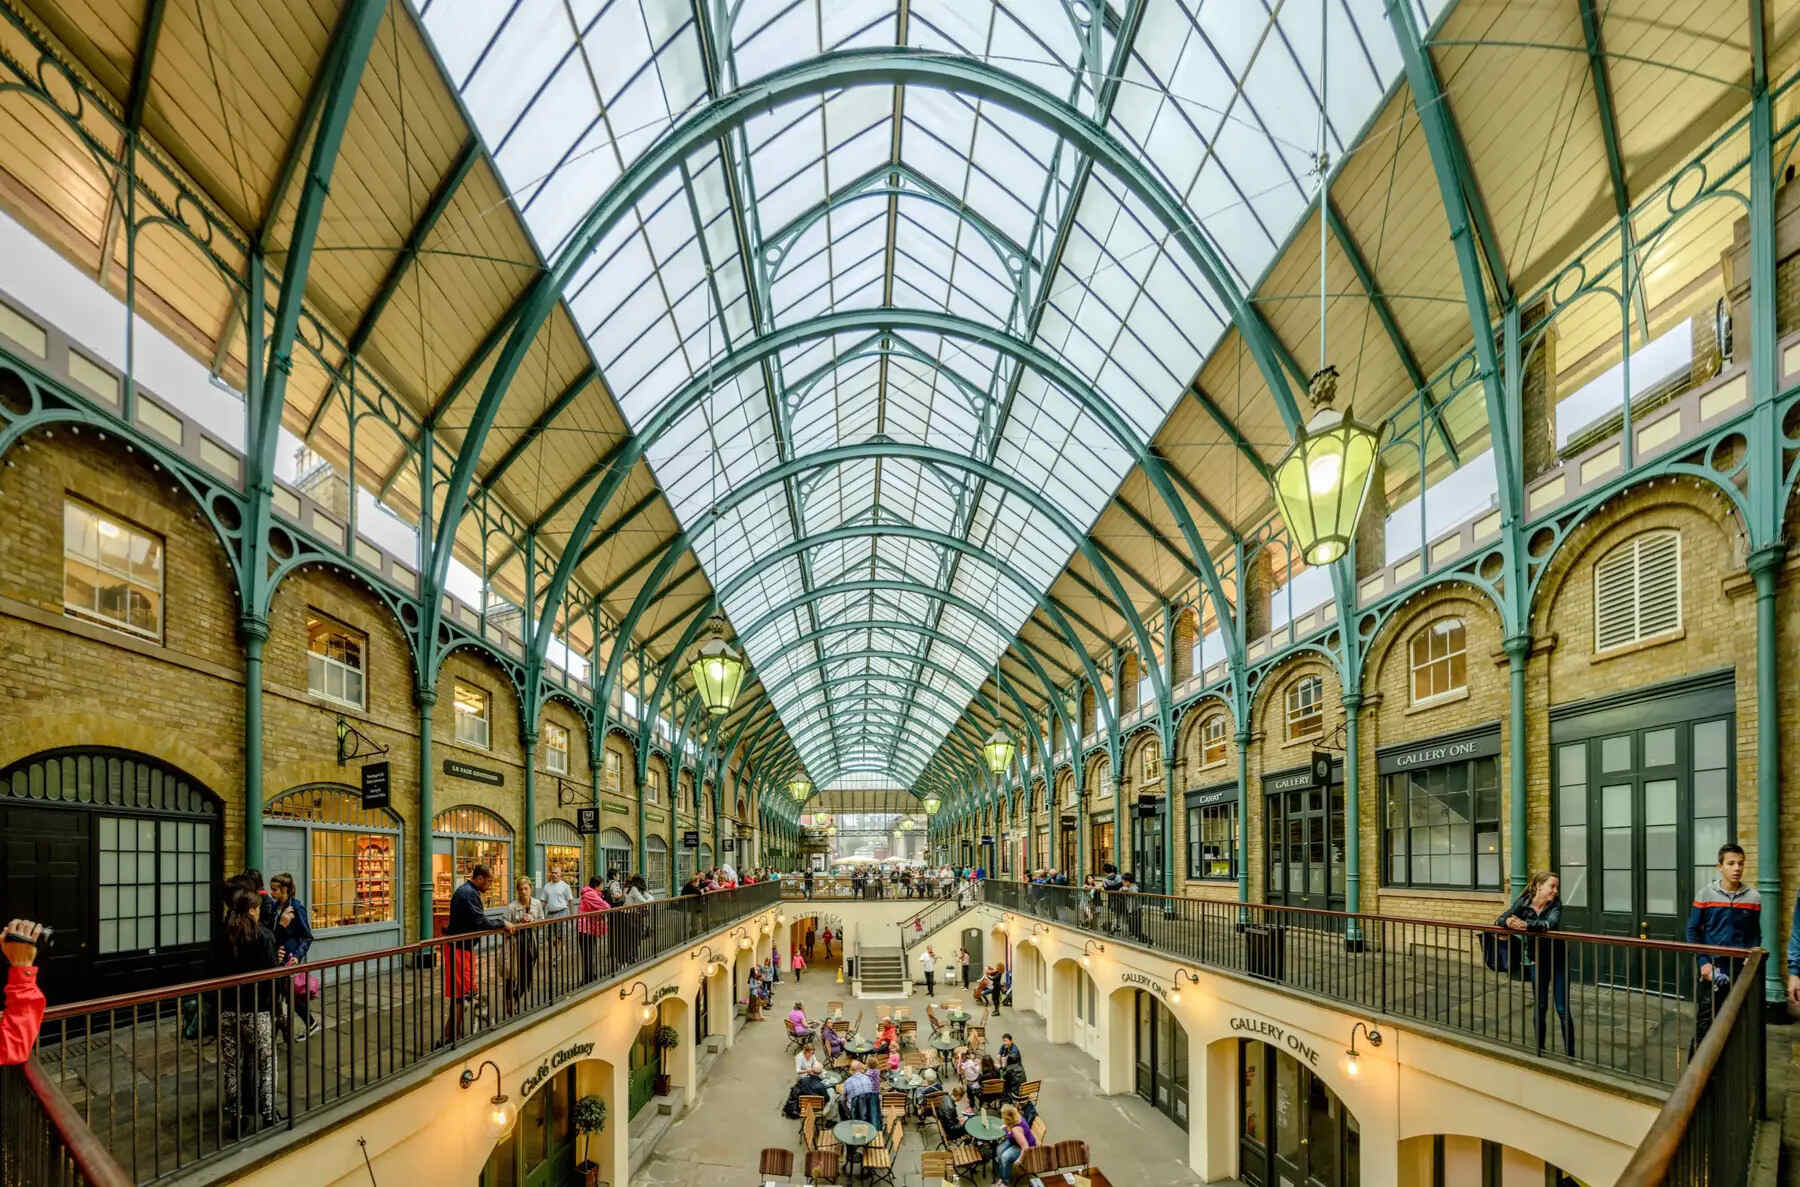 13 Fascinating Facts About Covent Garden Market London 1694544655 